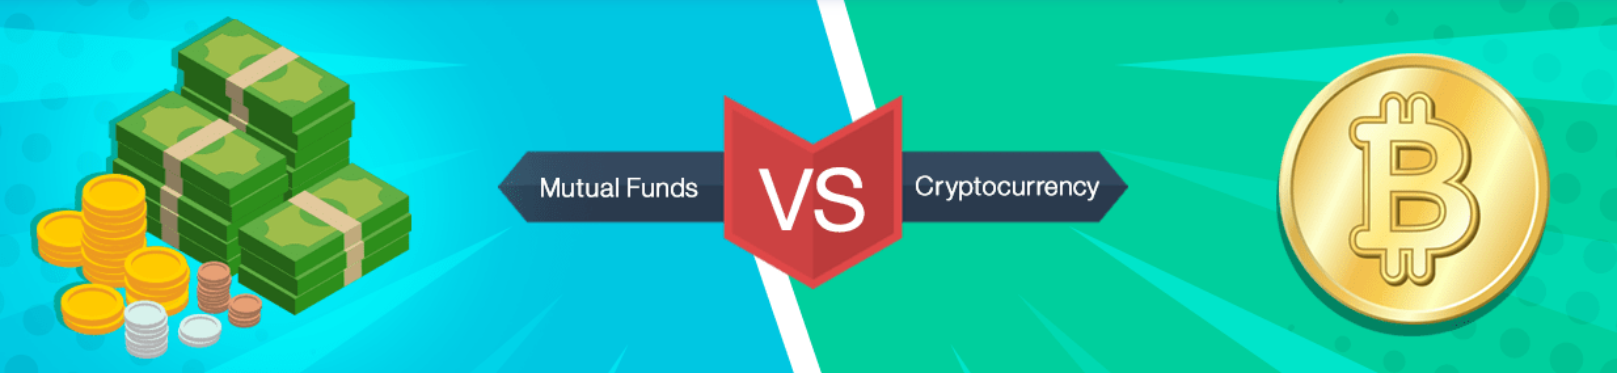 should I invest in crypto or mutual funds